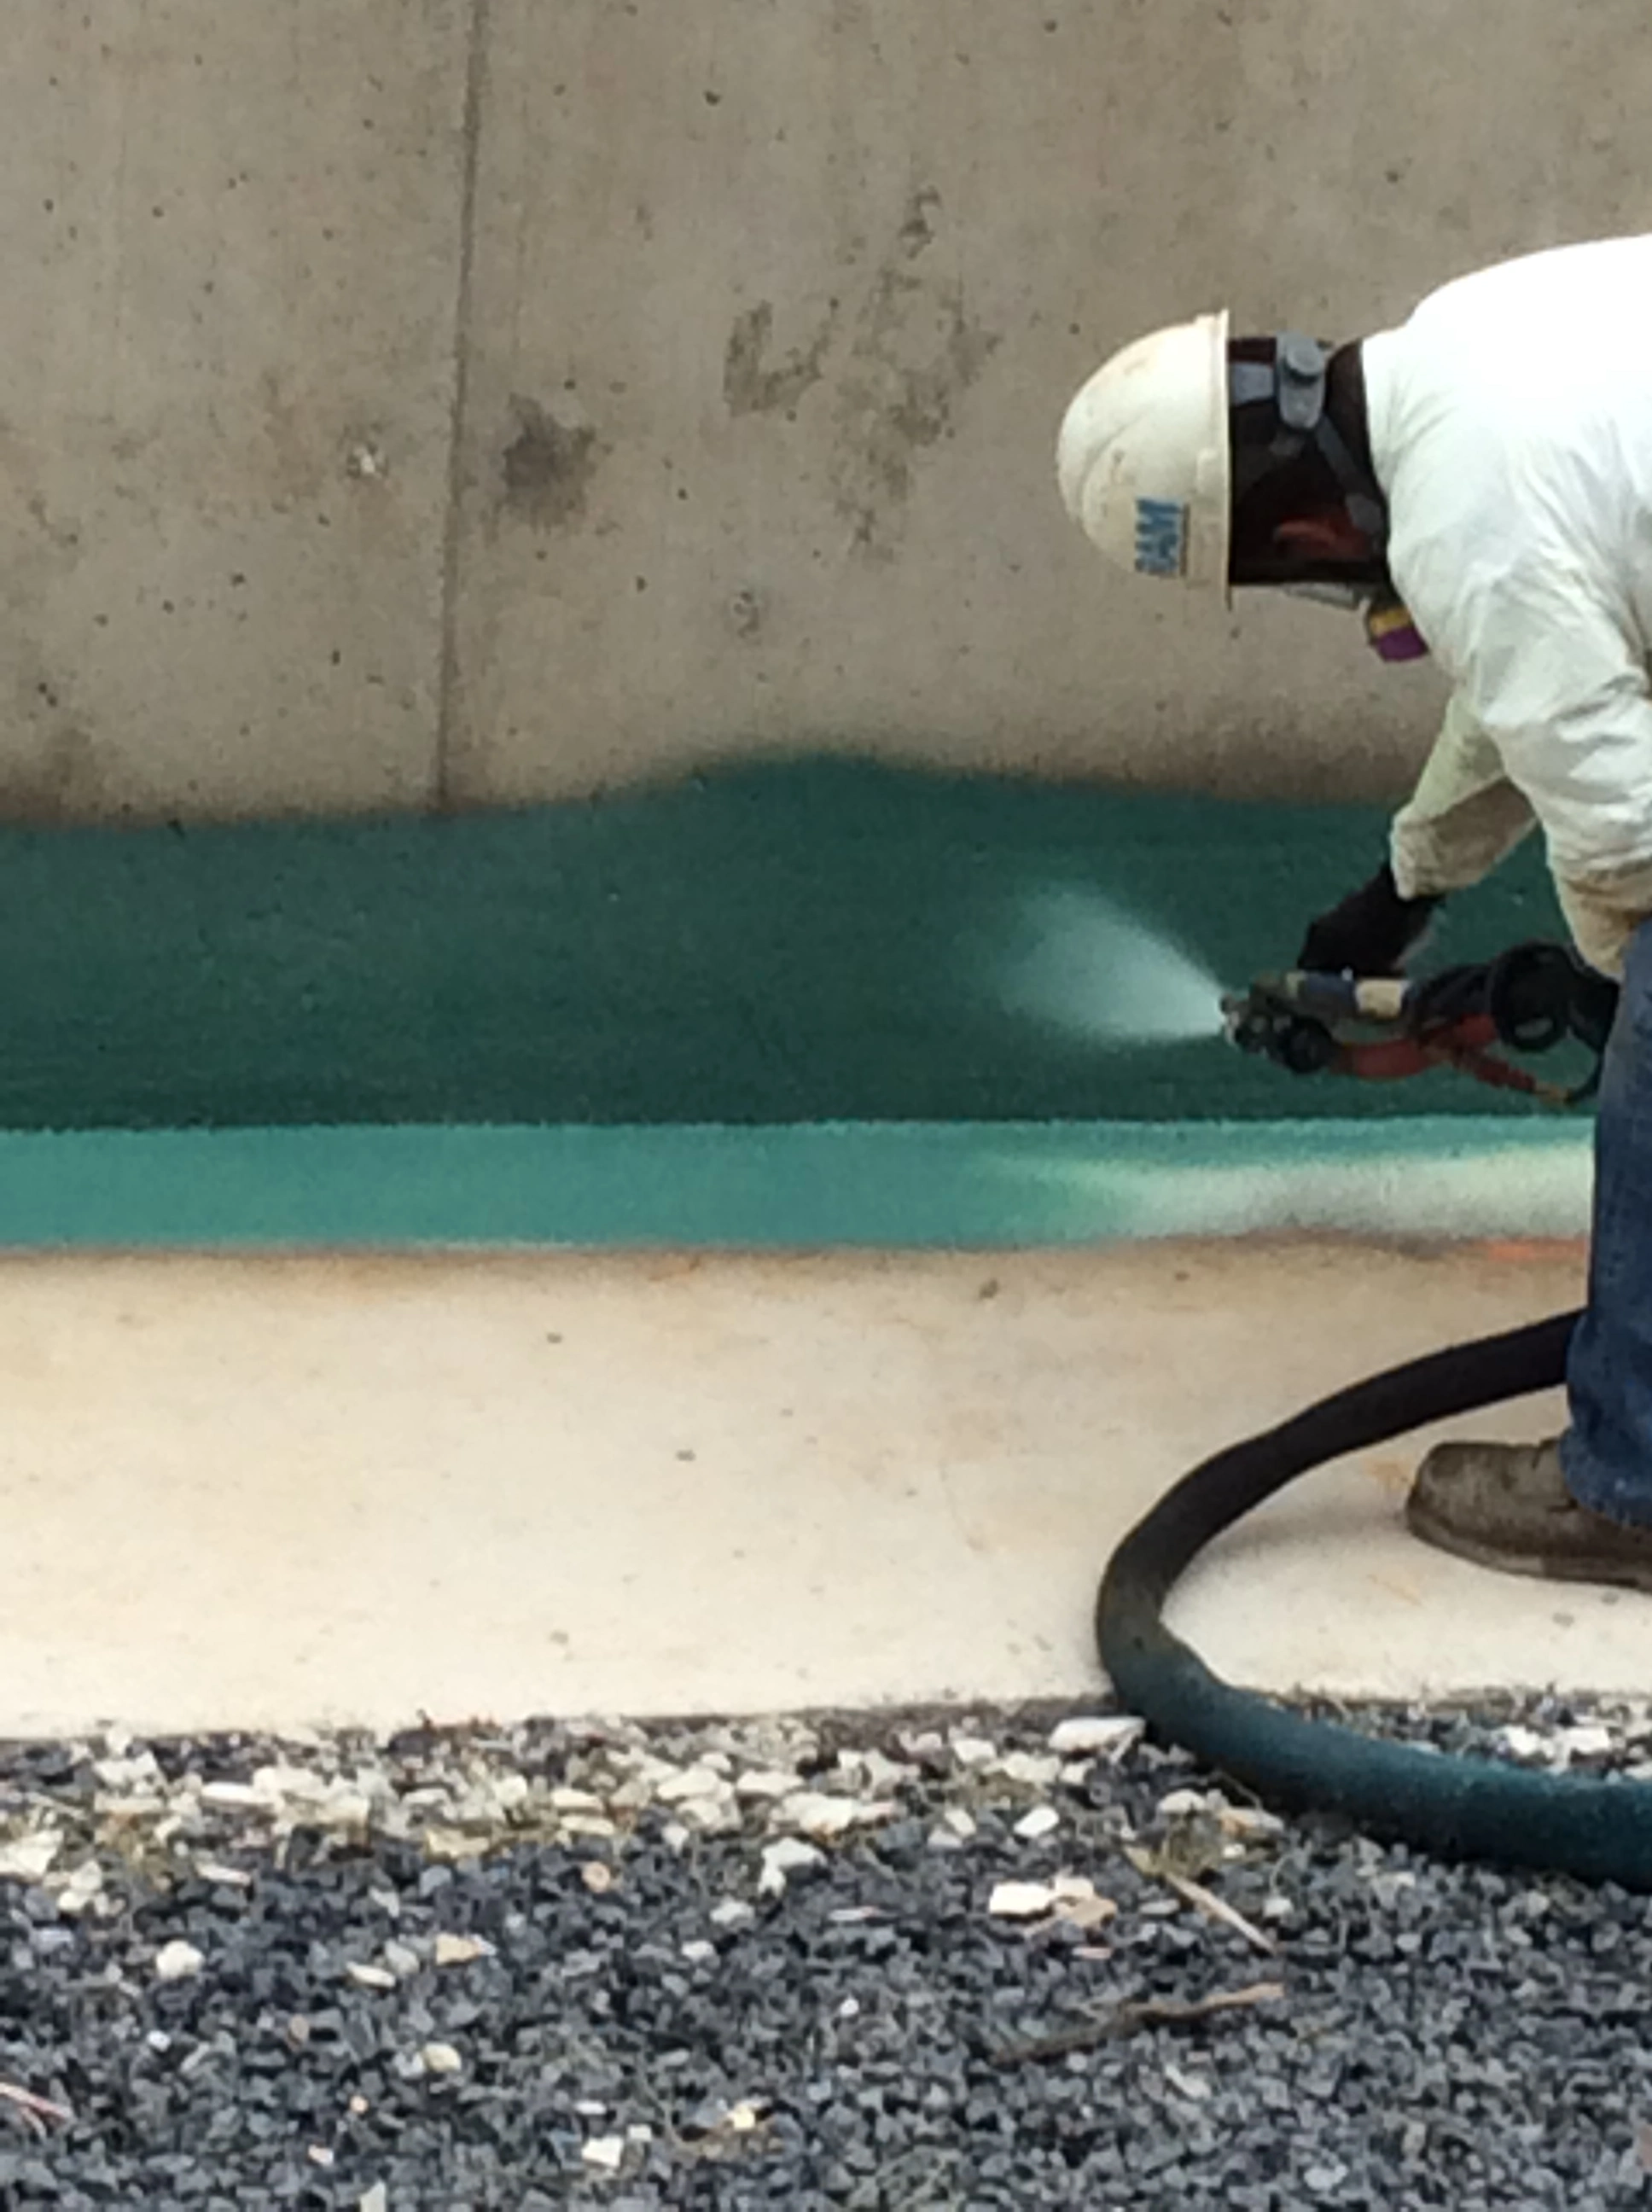 An image of a construction worker using a sprayer to apply a green coating to a bridge.